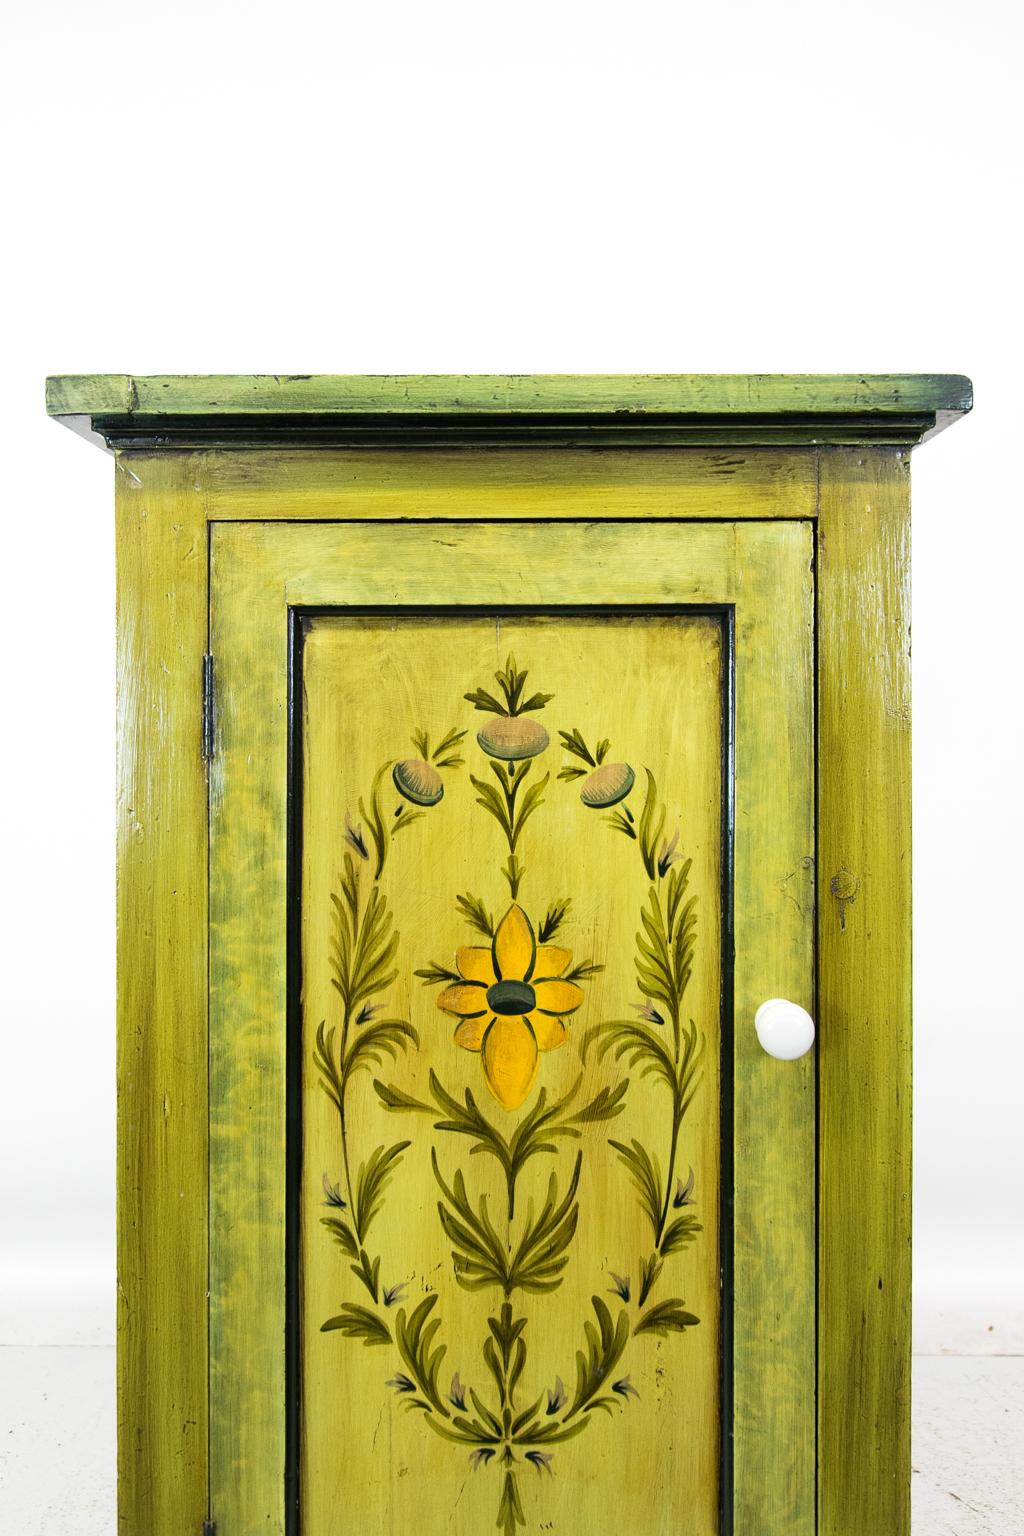 hand painted flowers on furniture